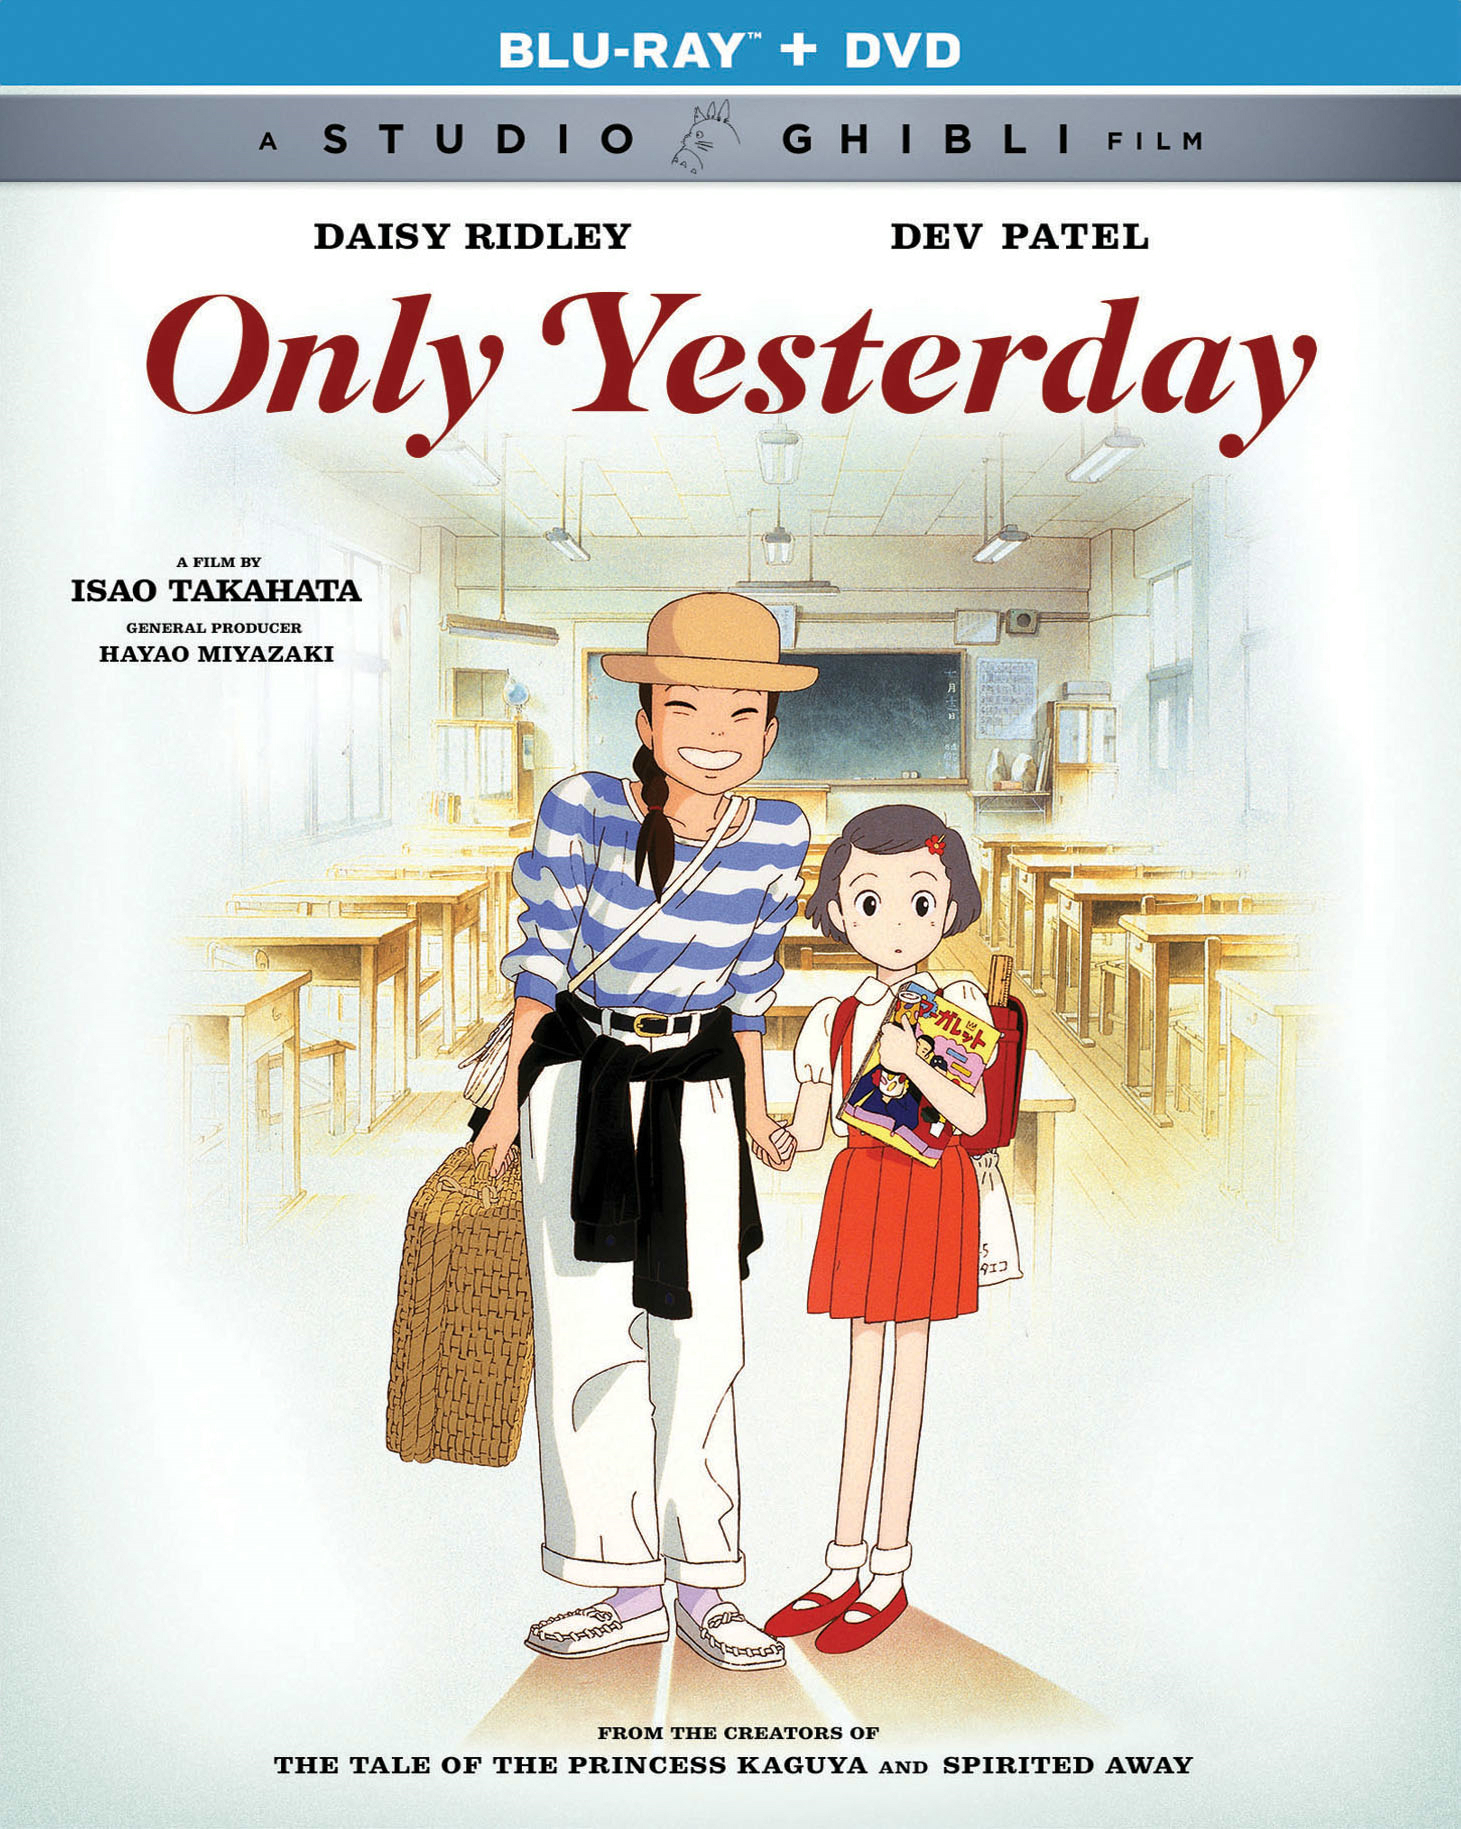 Only Yesterday (Digital) - Blu-ray [ 2016 ]  - Anime Movies On Blu-ray - Movies On GRUV